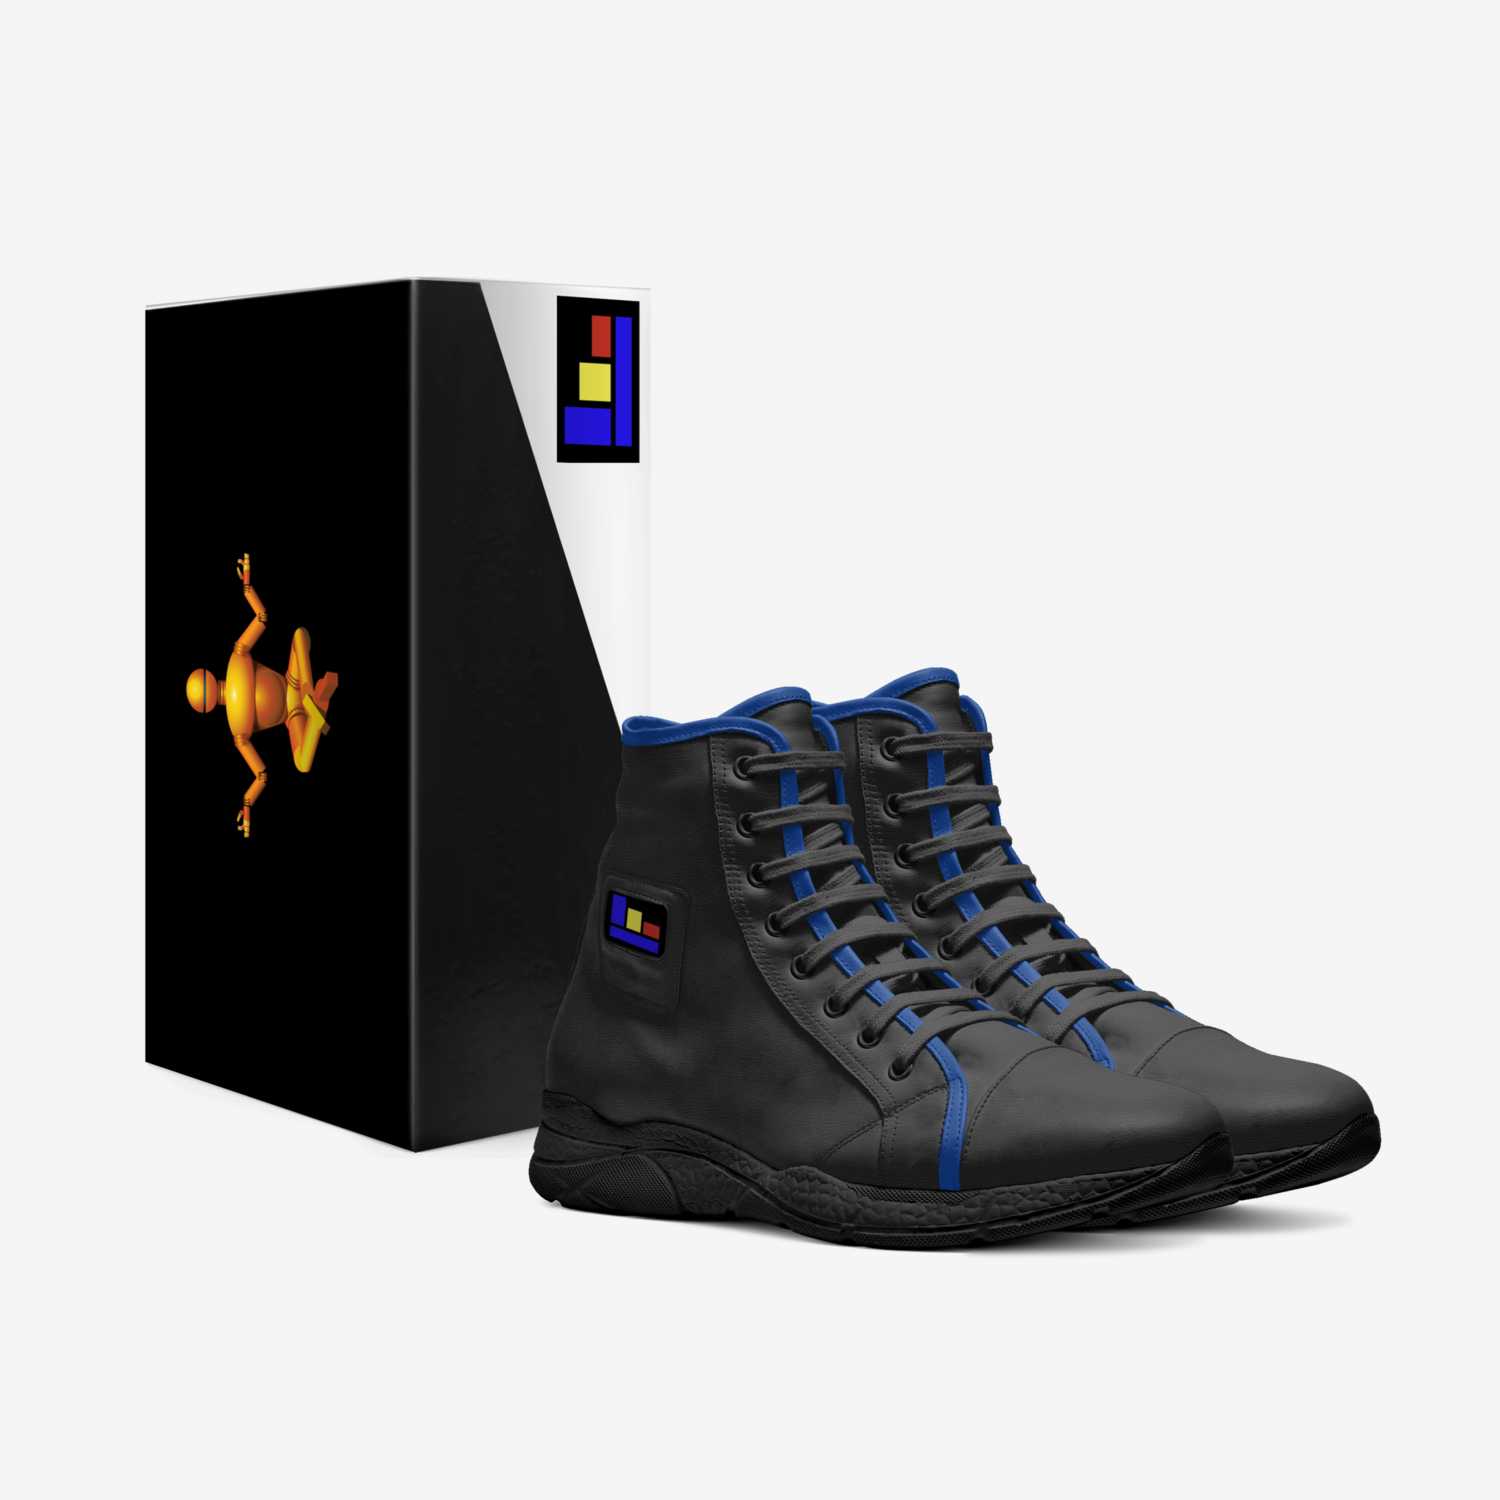 Karma the Game custom made in Italy shoes by René Reyes | Box view